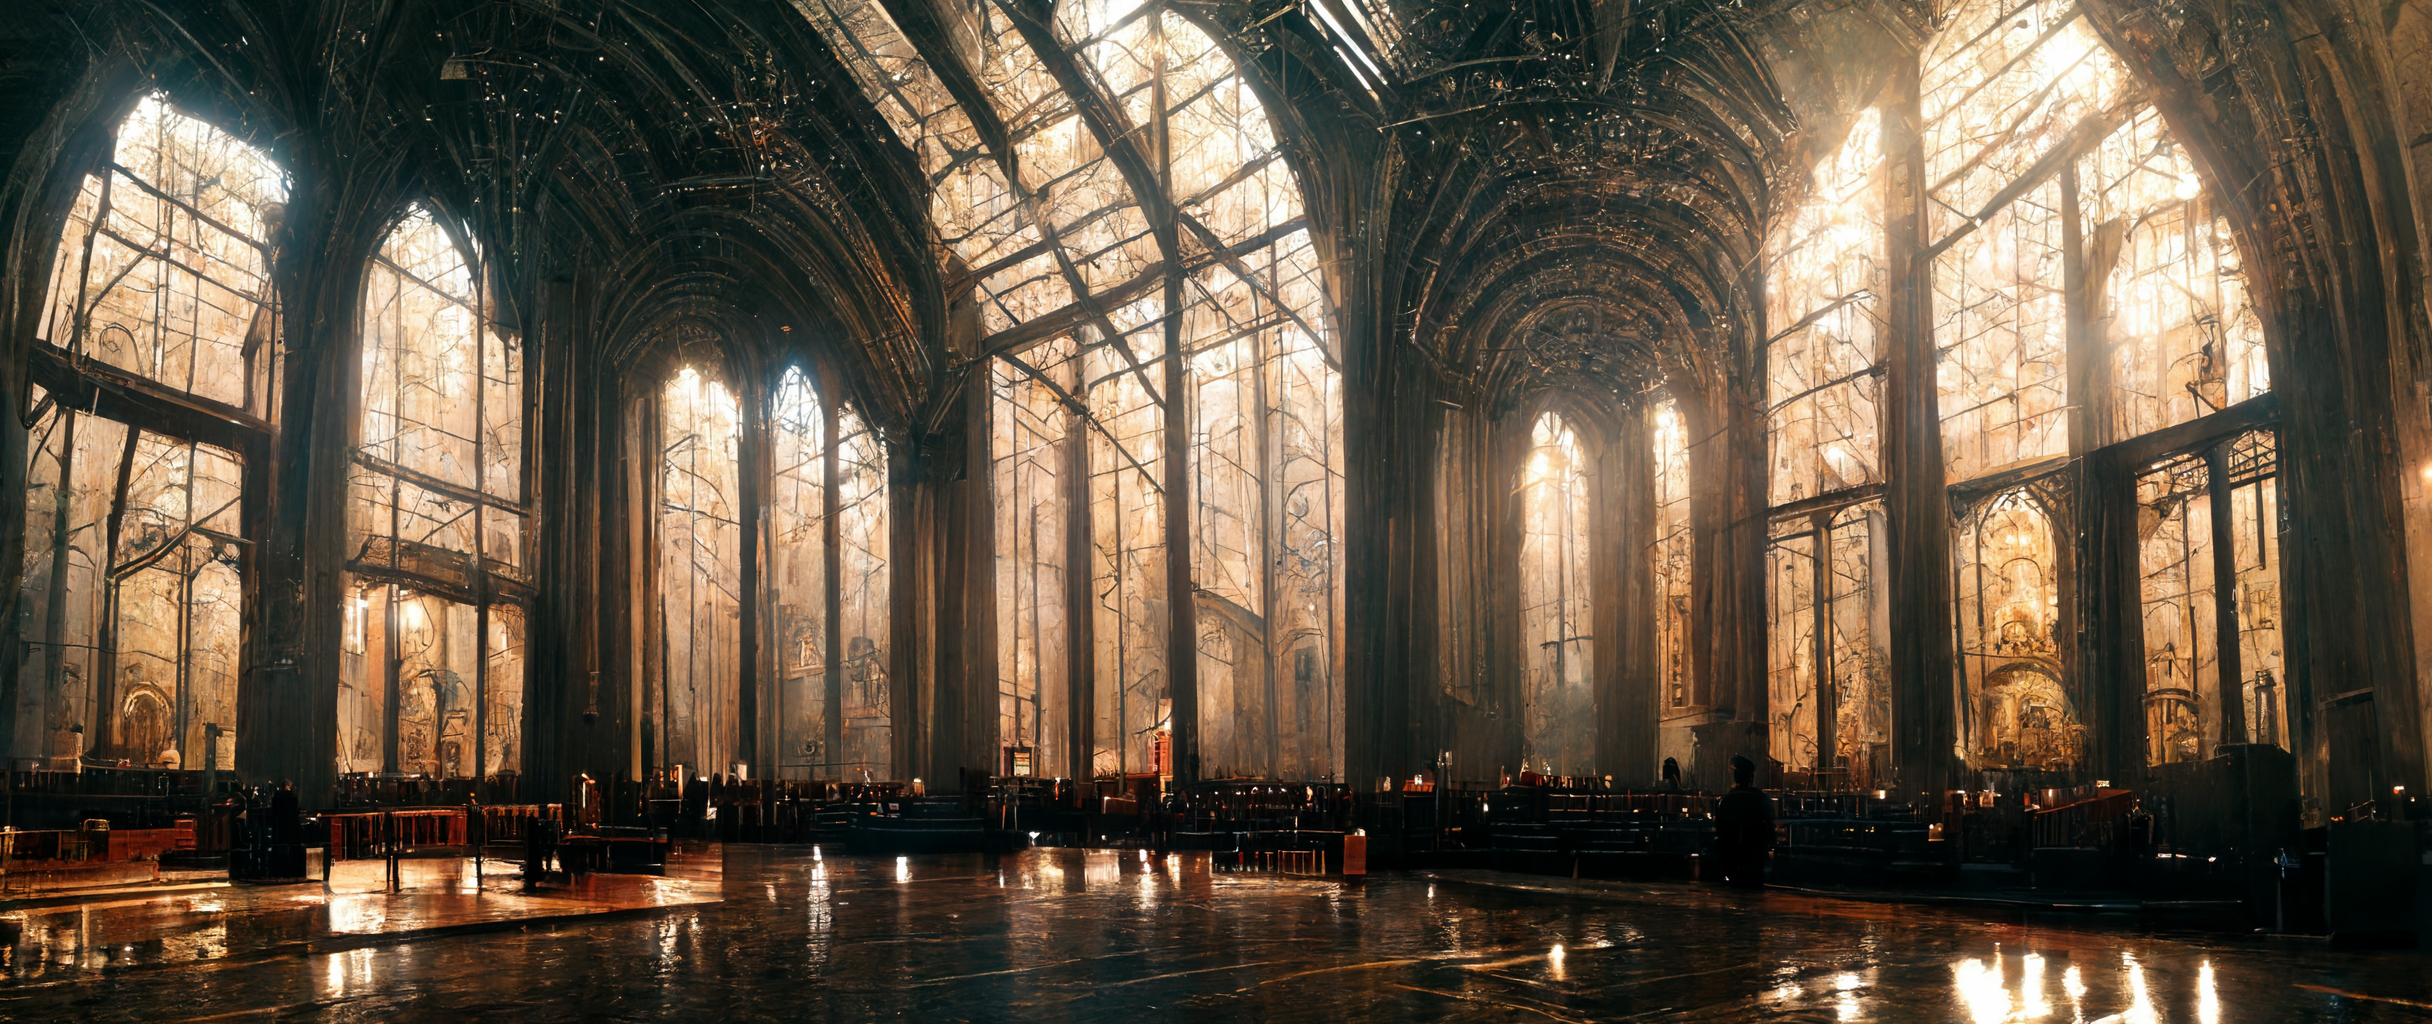 vibe_cathedral_interior_demons_night_spooky_photorealism_octane_b61e6ab1-11ac-40c4-b549-c82ea025dded